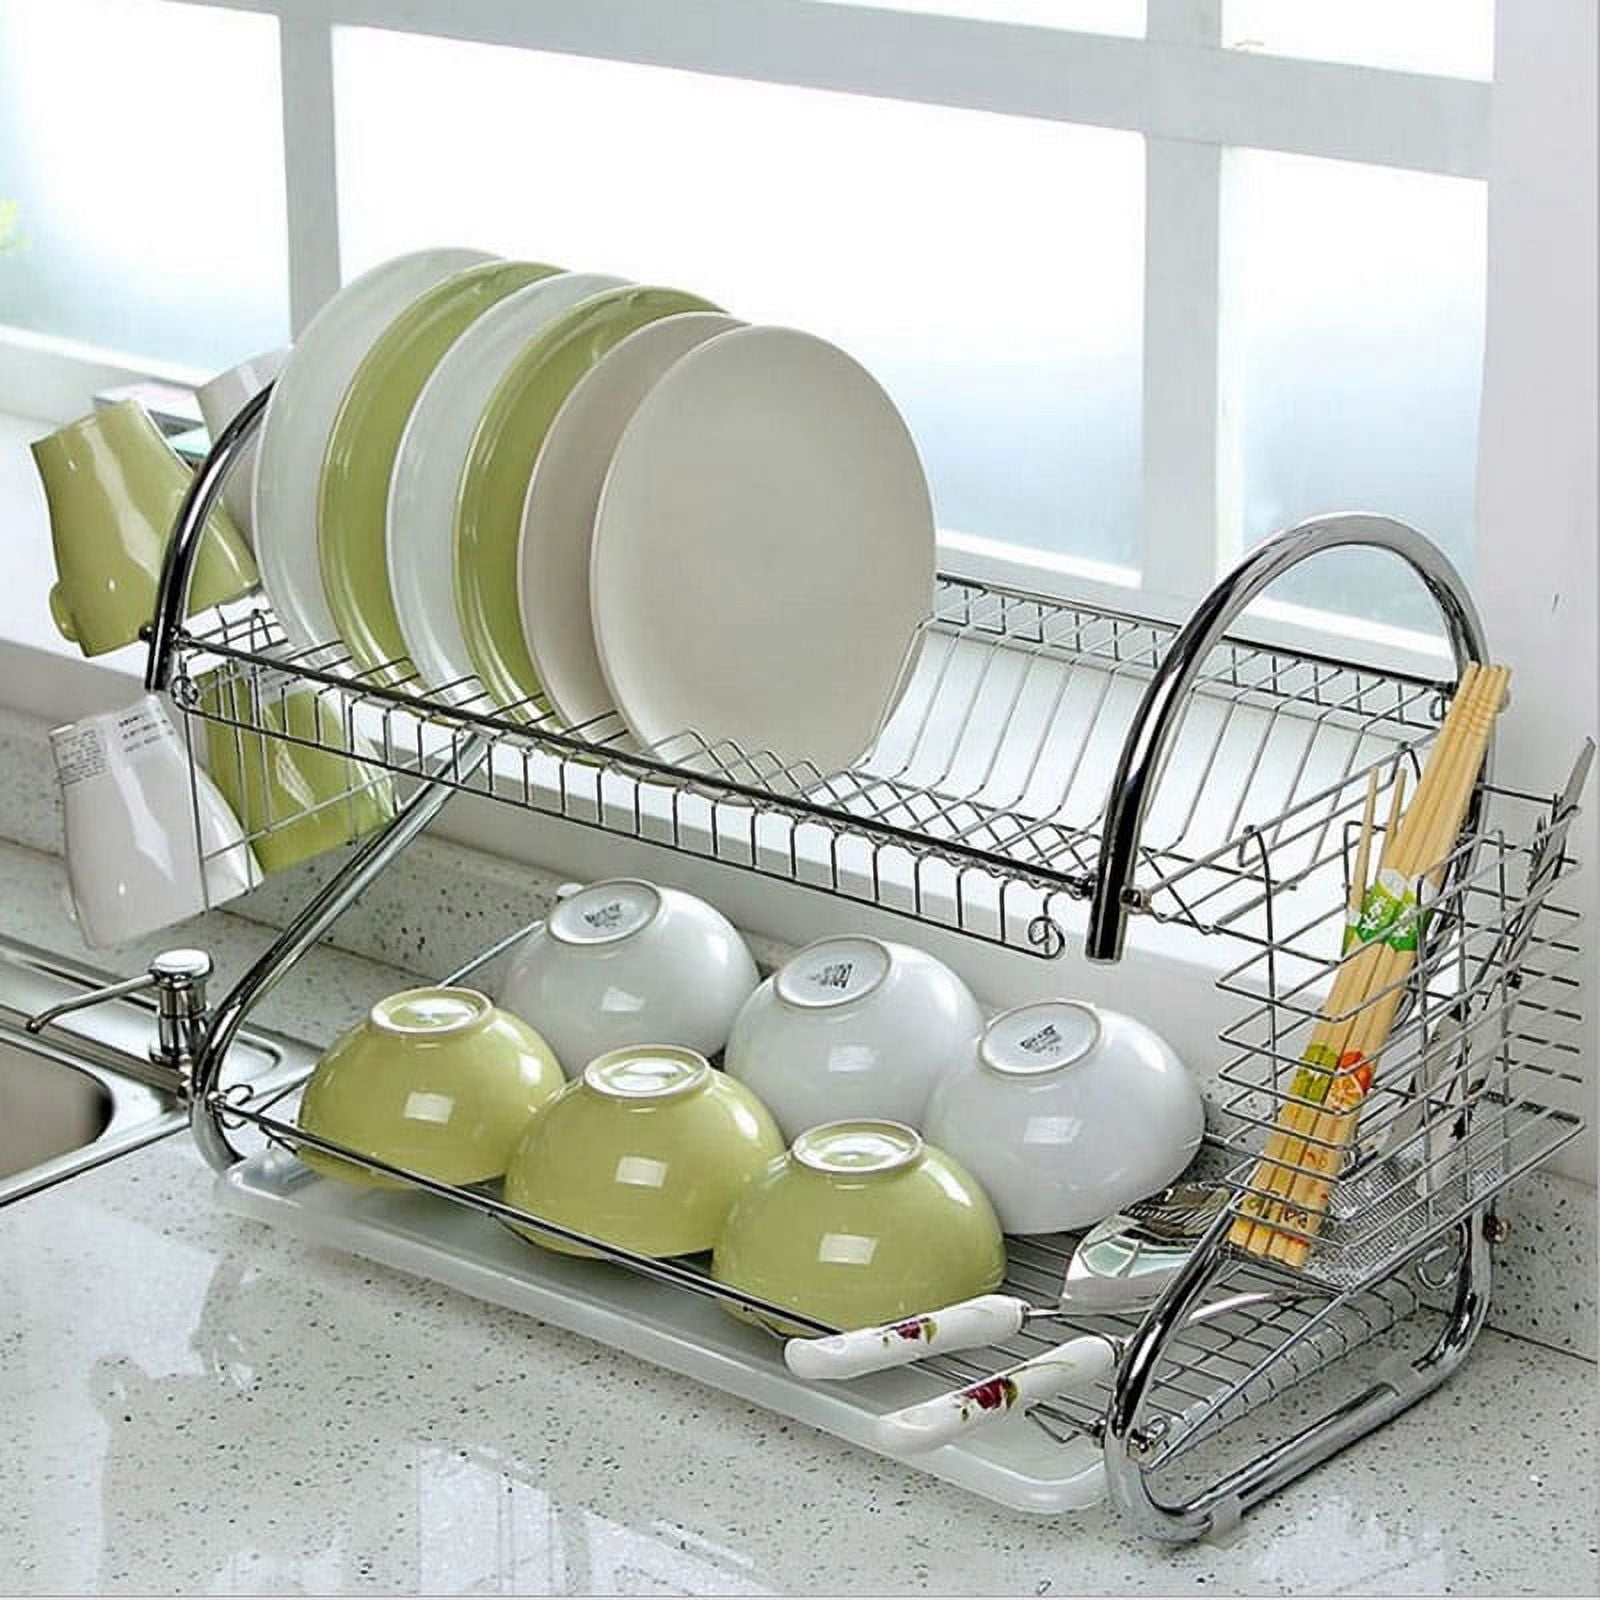 Qienrrae Dish Drying Rack, 2 Tier Large Rack and Drainboard Set with Swivel  Spout, Stainless Steel Drainer for Kitchen Counter Wine Glass Holder